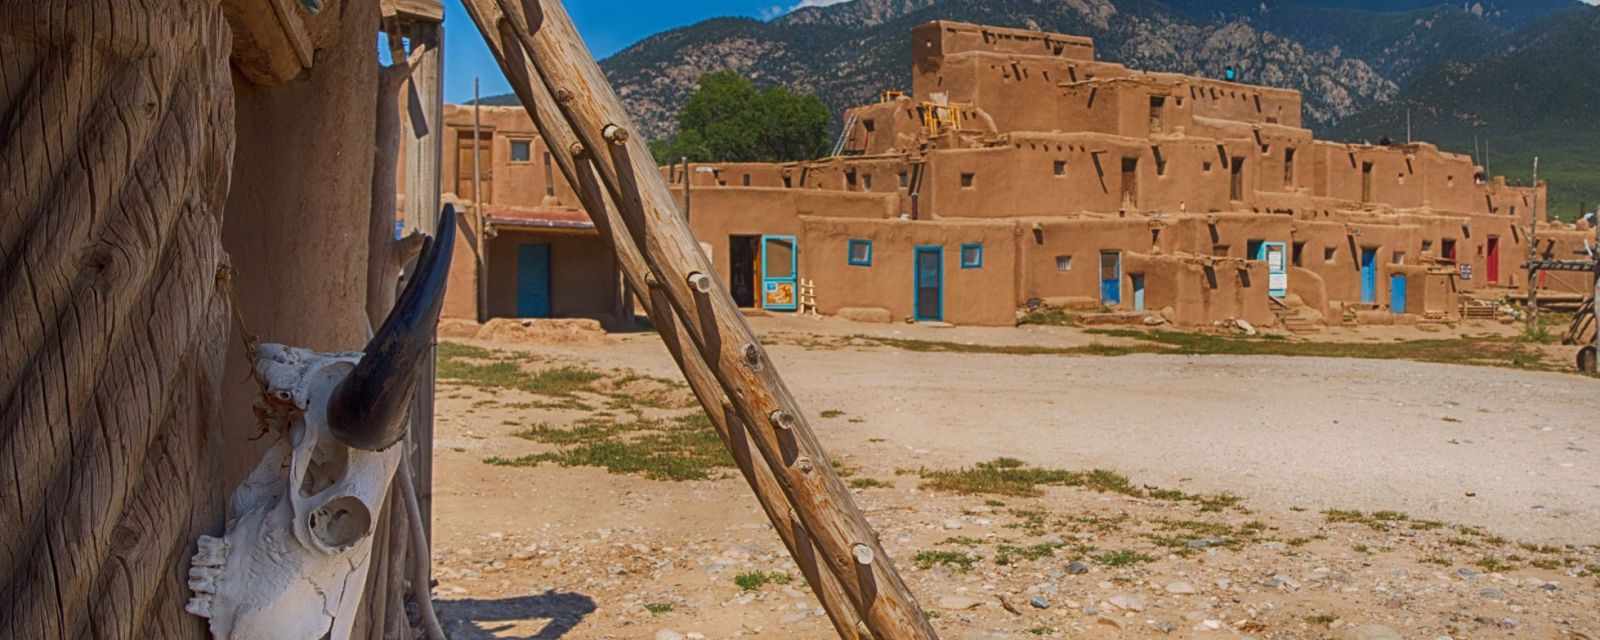 Taos Pueblo - New Mexico - Best Time and Tips